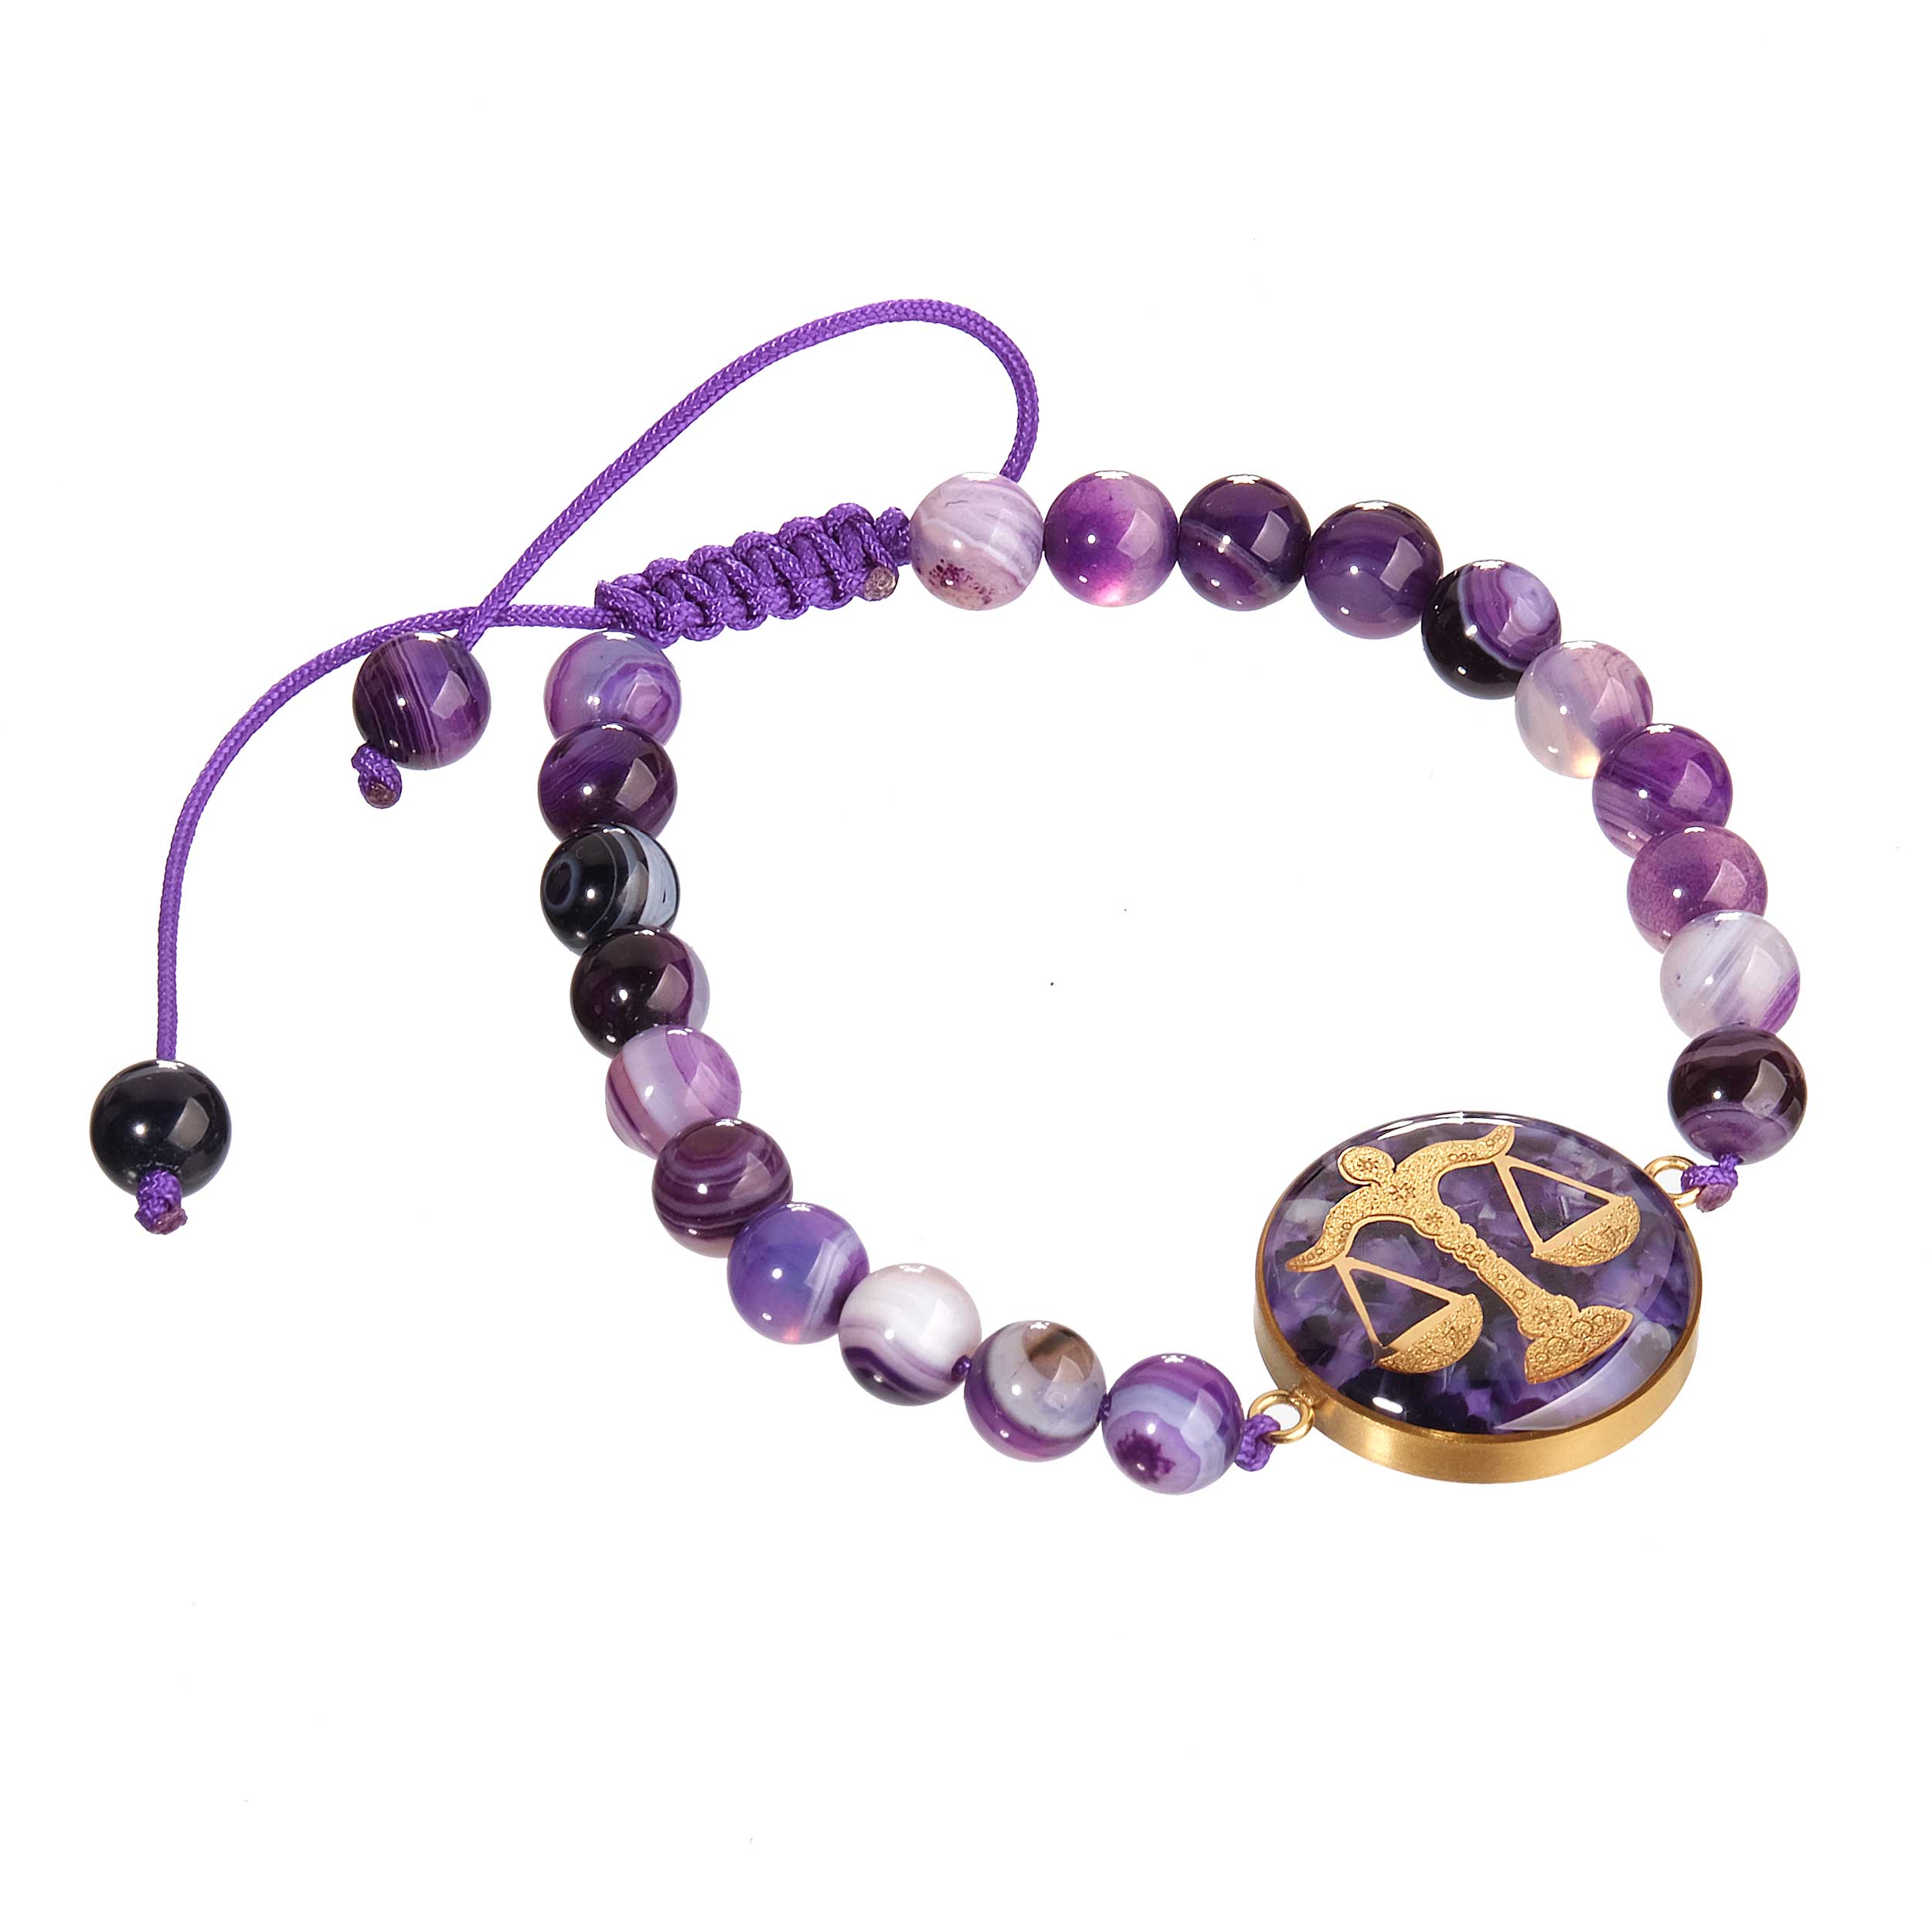 Purple agate stone bracelet and 24 carat gold leaf with the symbol of October